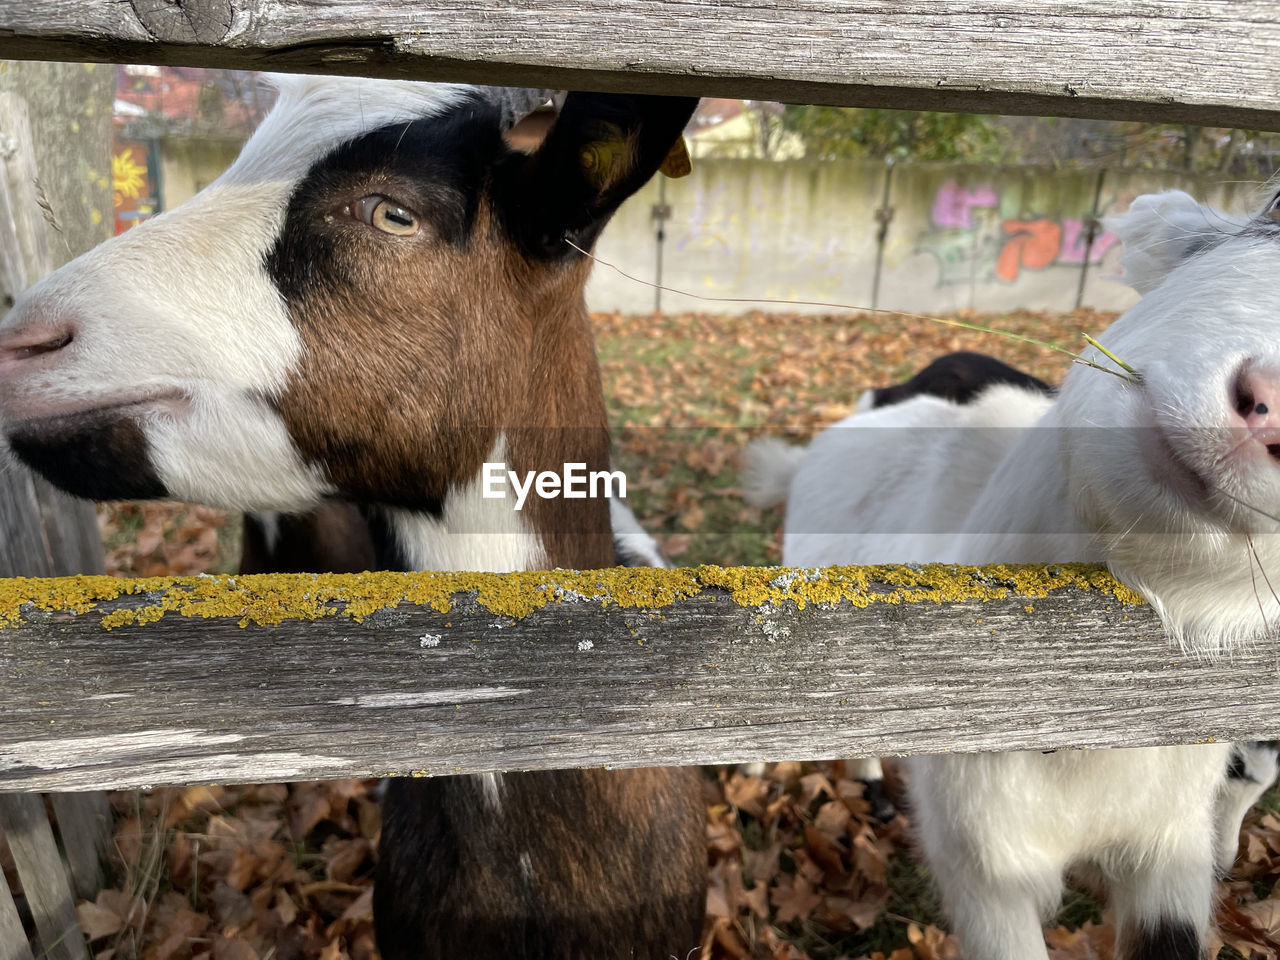 CLOSE-UP OF GOAT IN ANIMAL PEN